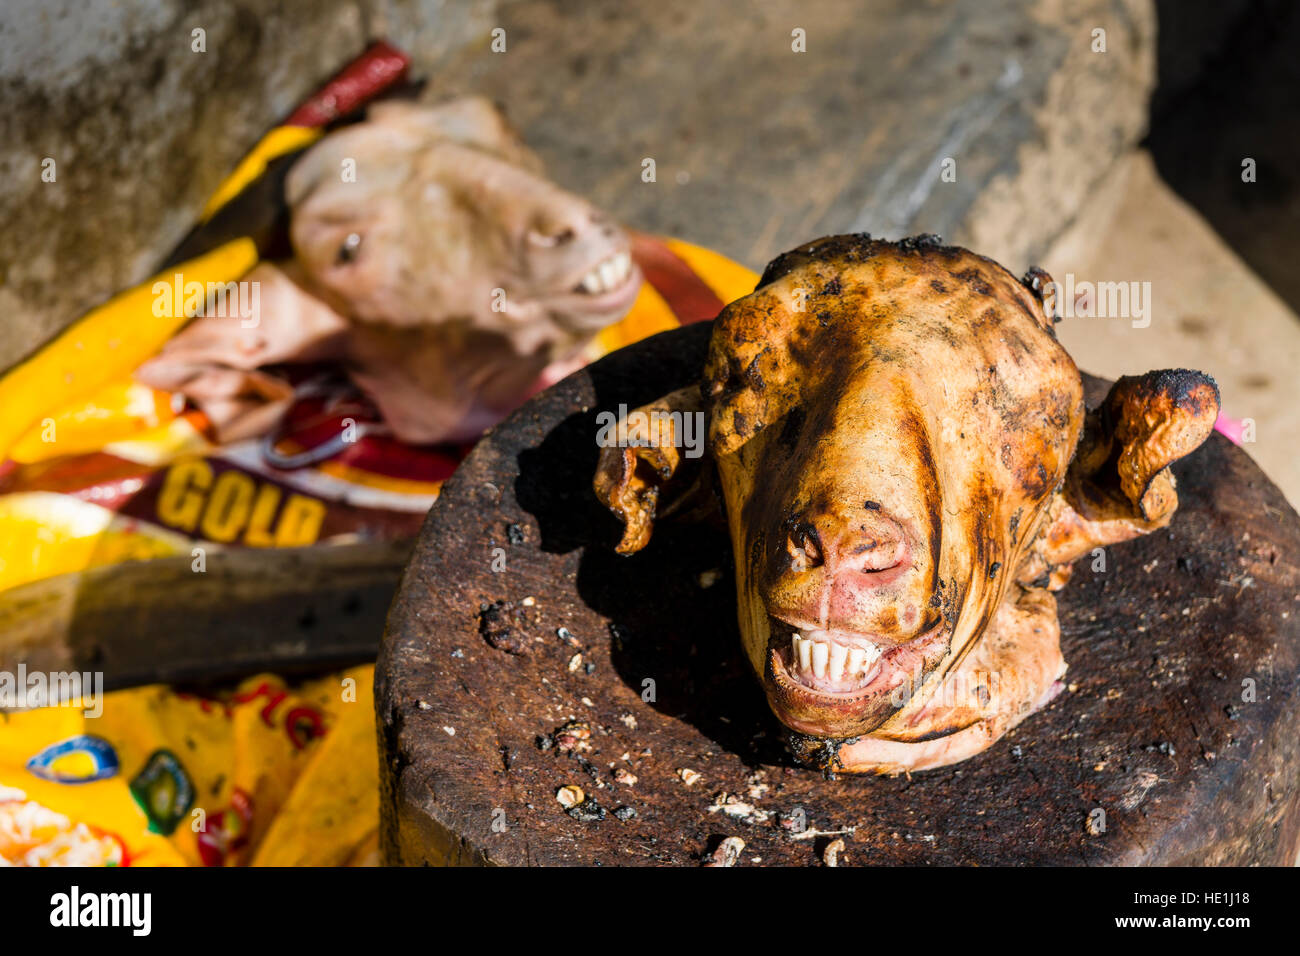 A goat head is offered for sale outside a meat shop Stock Photo